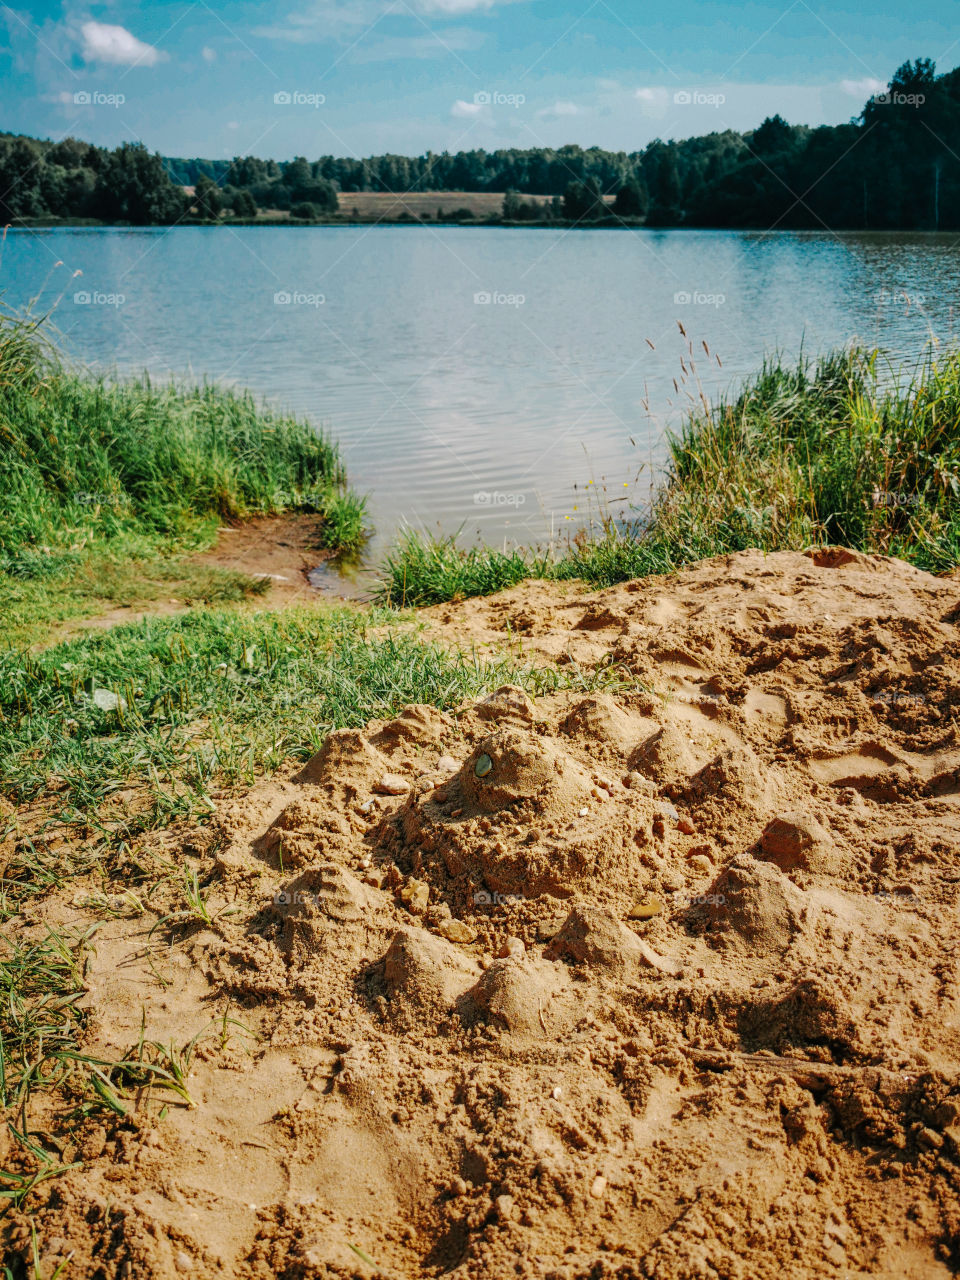 Sandcastle on a lake beach in Russia